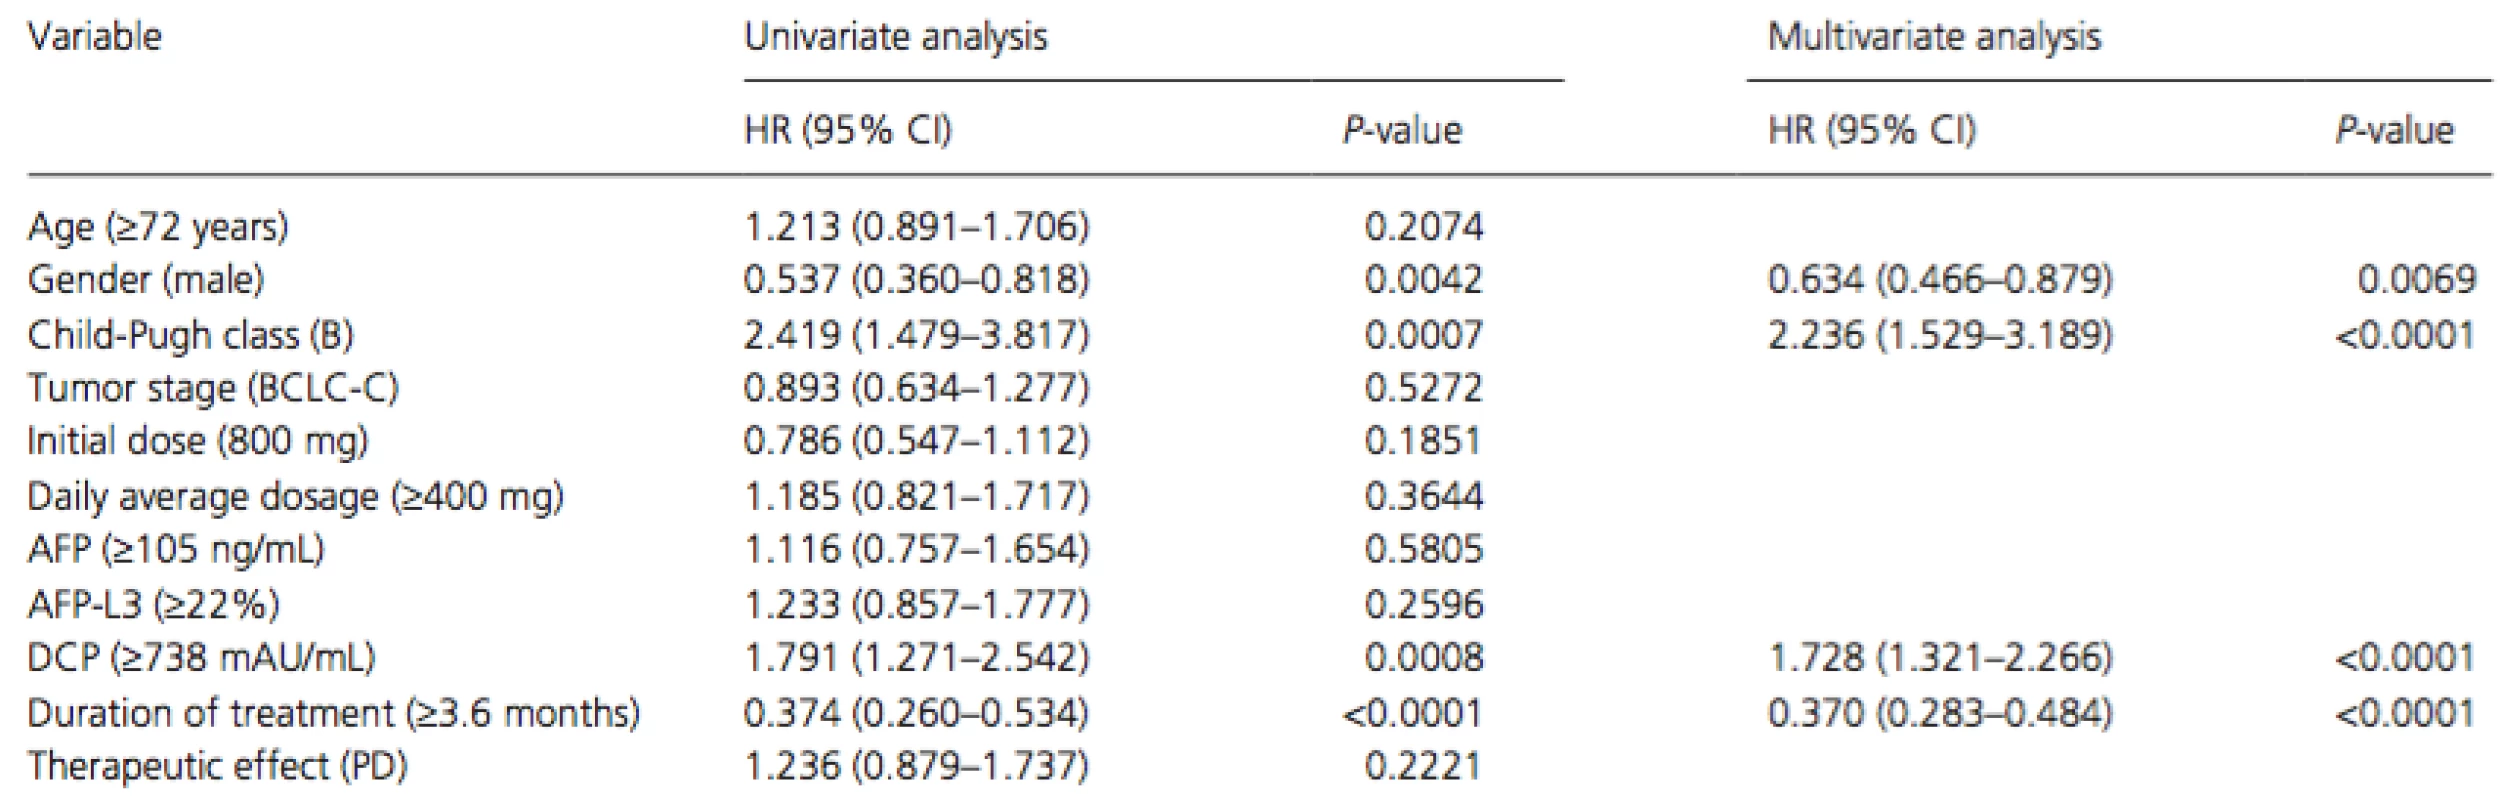 Univariate and multivariate analyses of overall survival in all patients